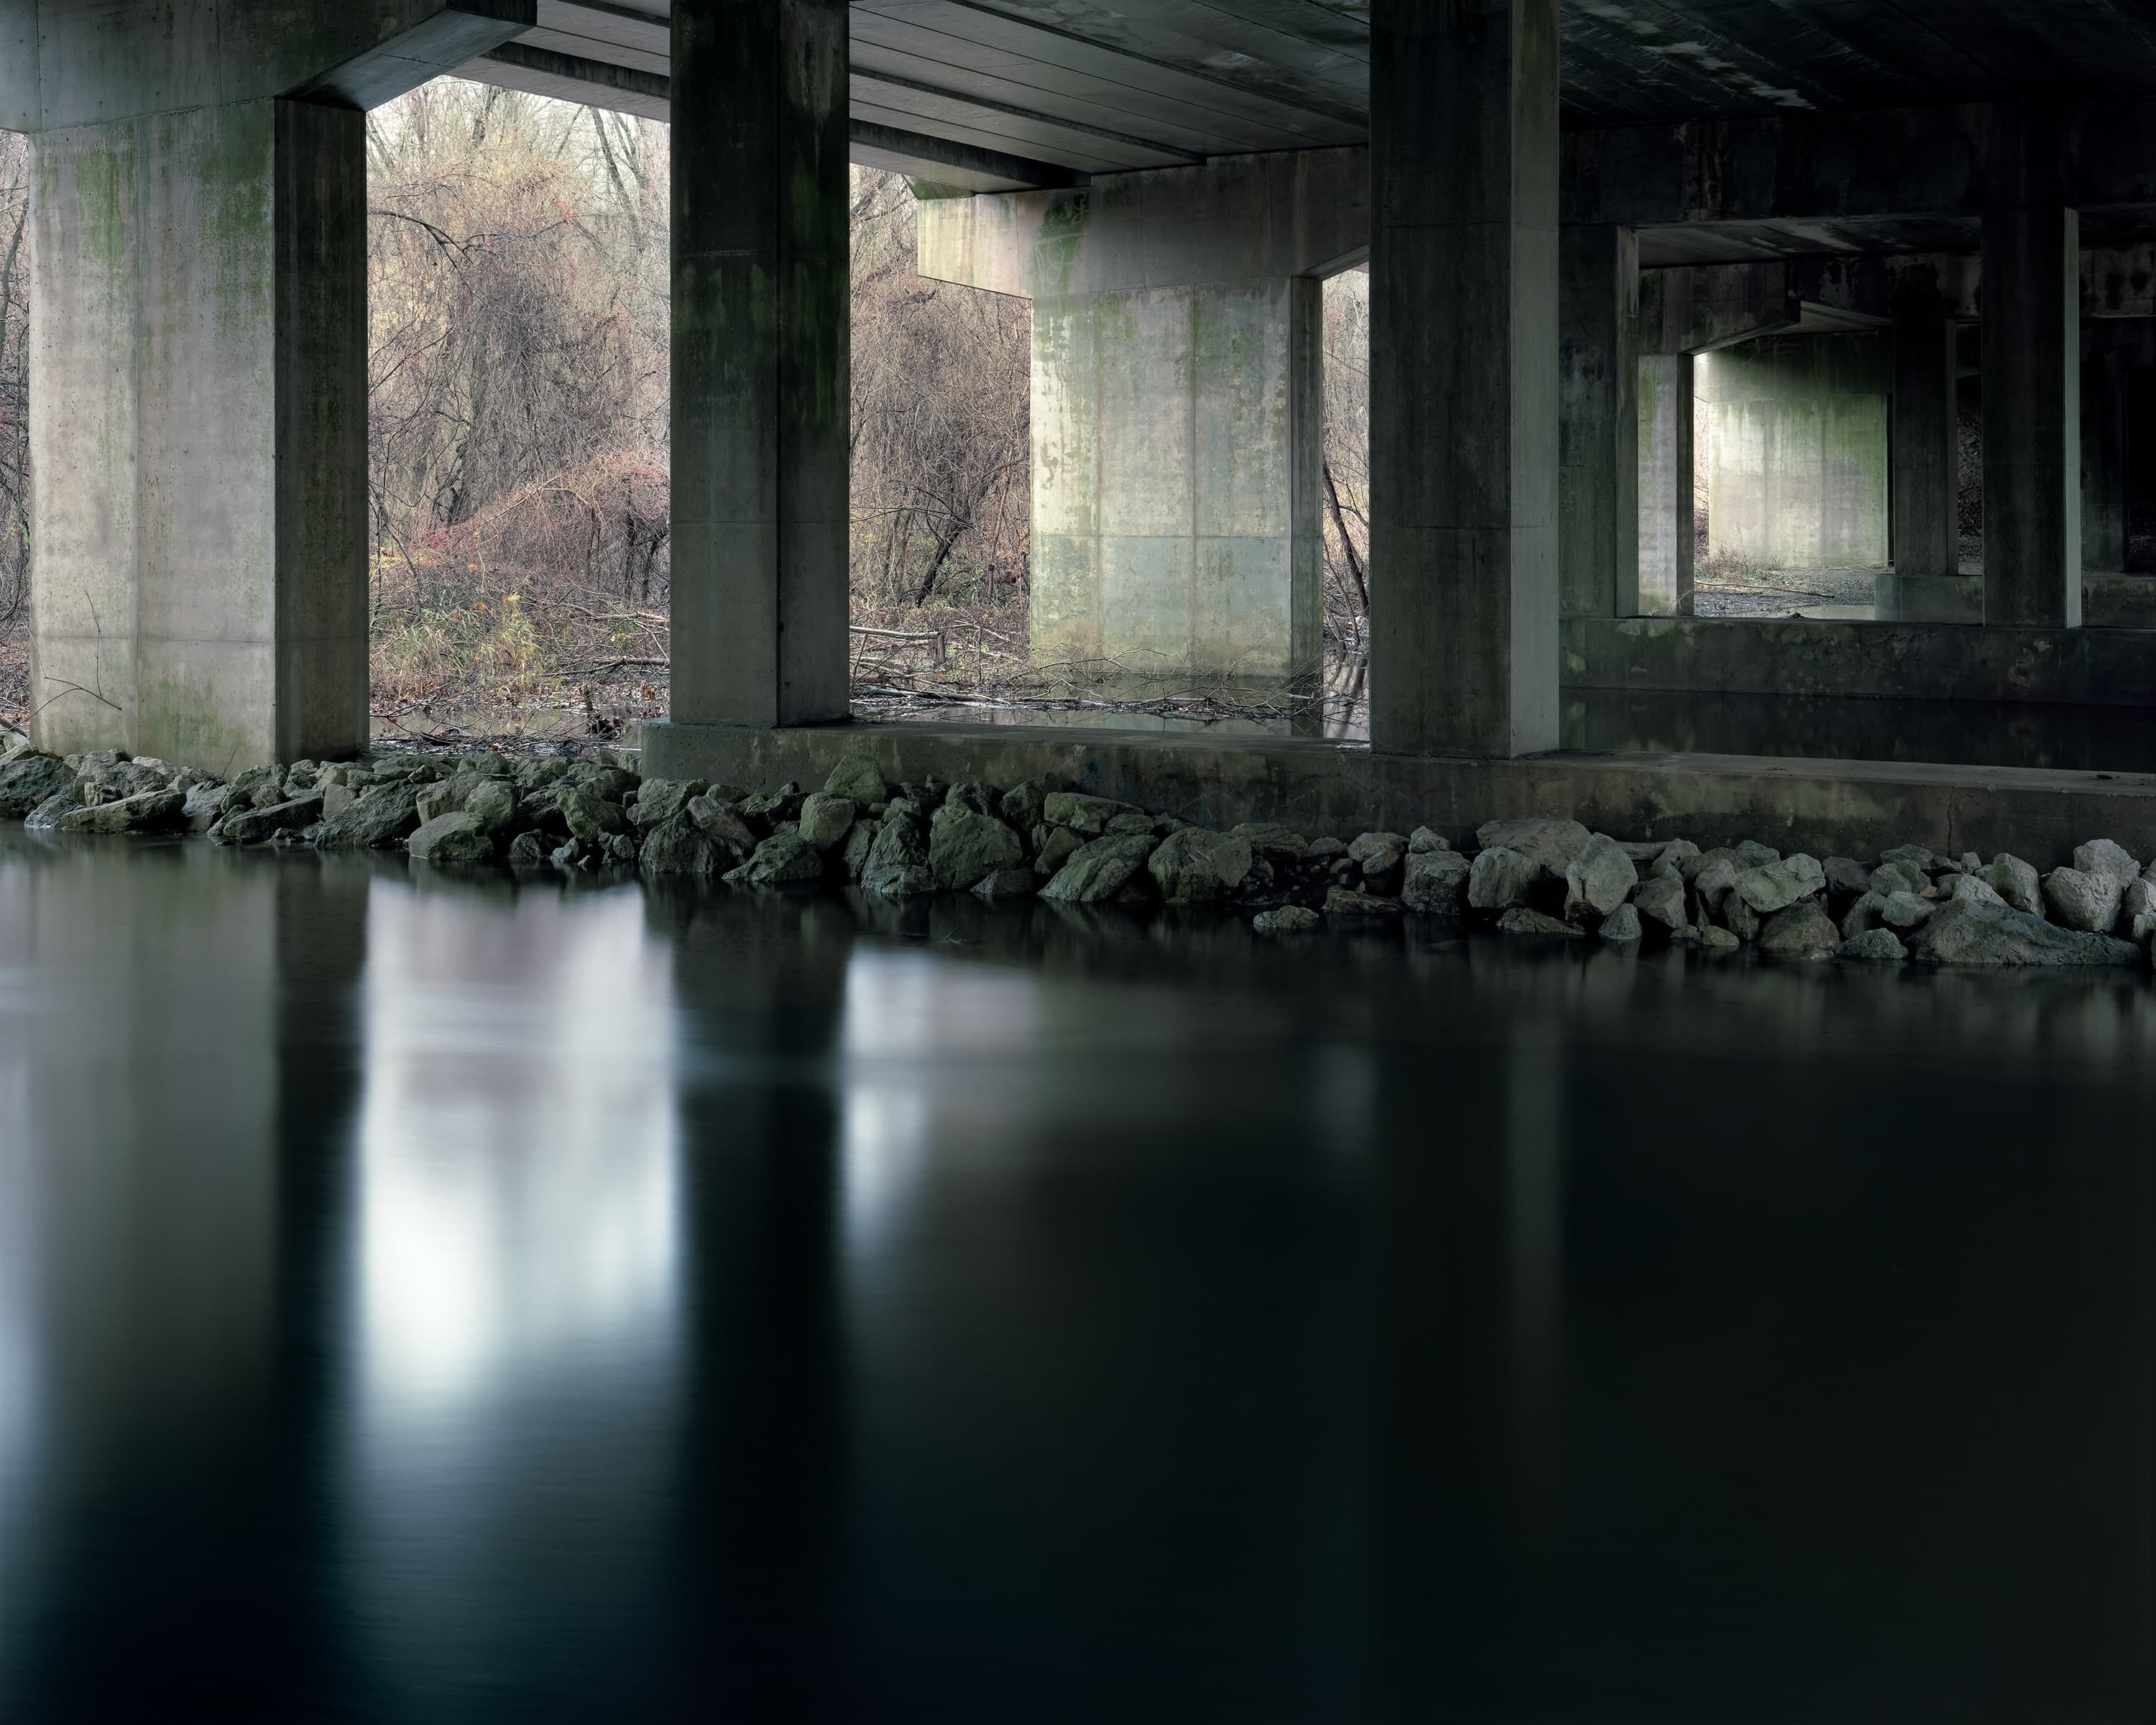 A creek passes under a highway with multiple concrete piers, at one end is an overgrown forest in the fall.